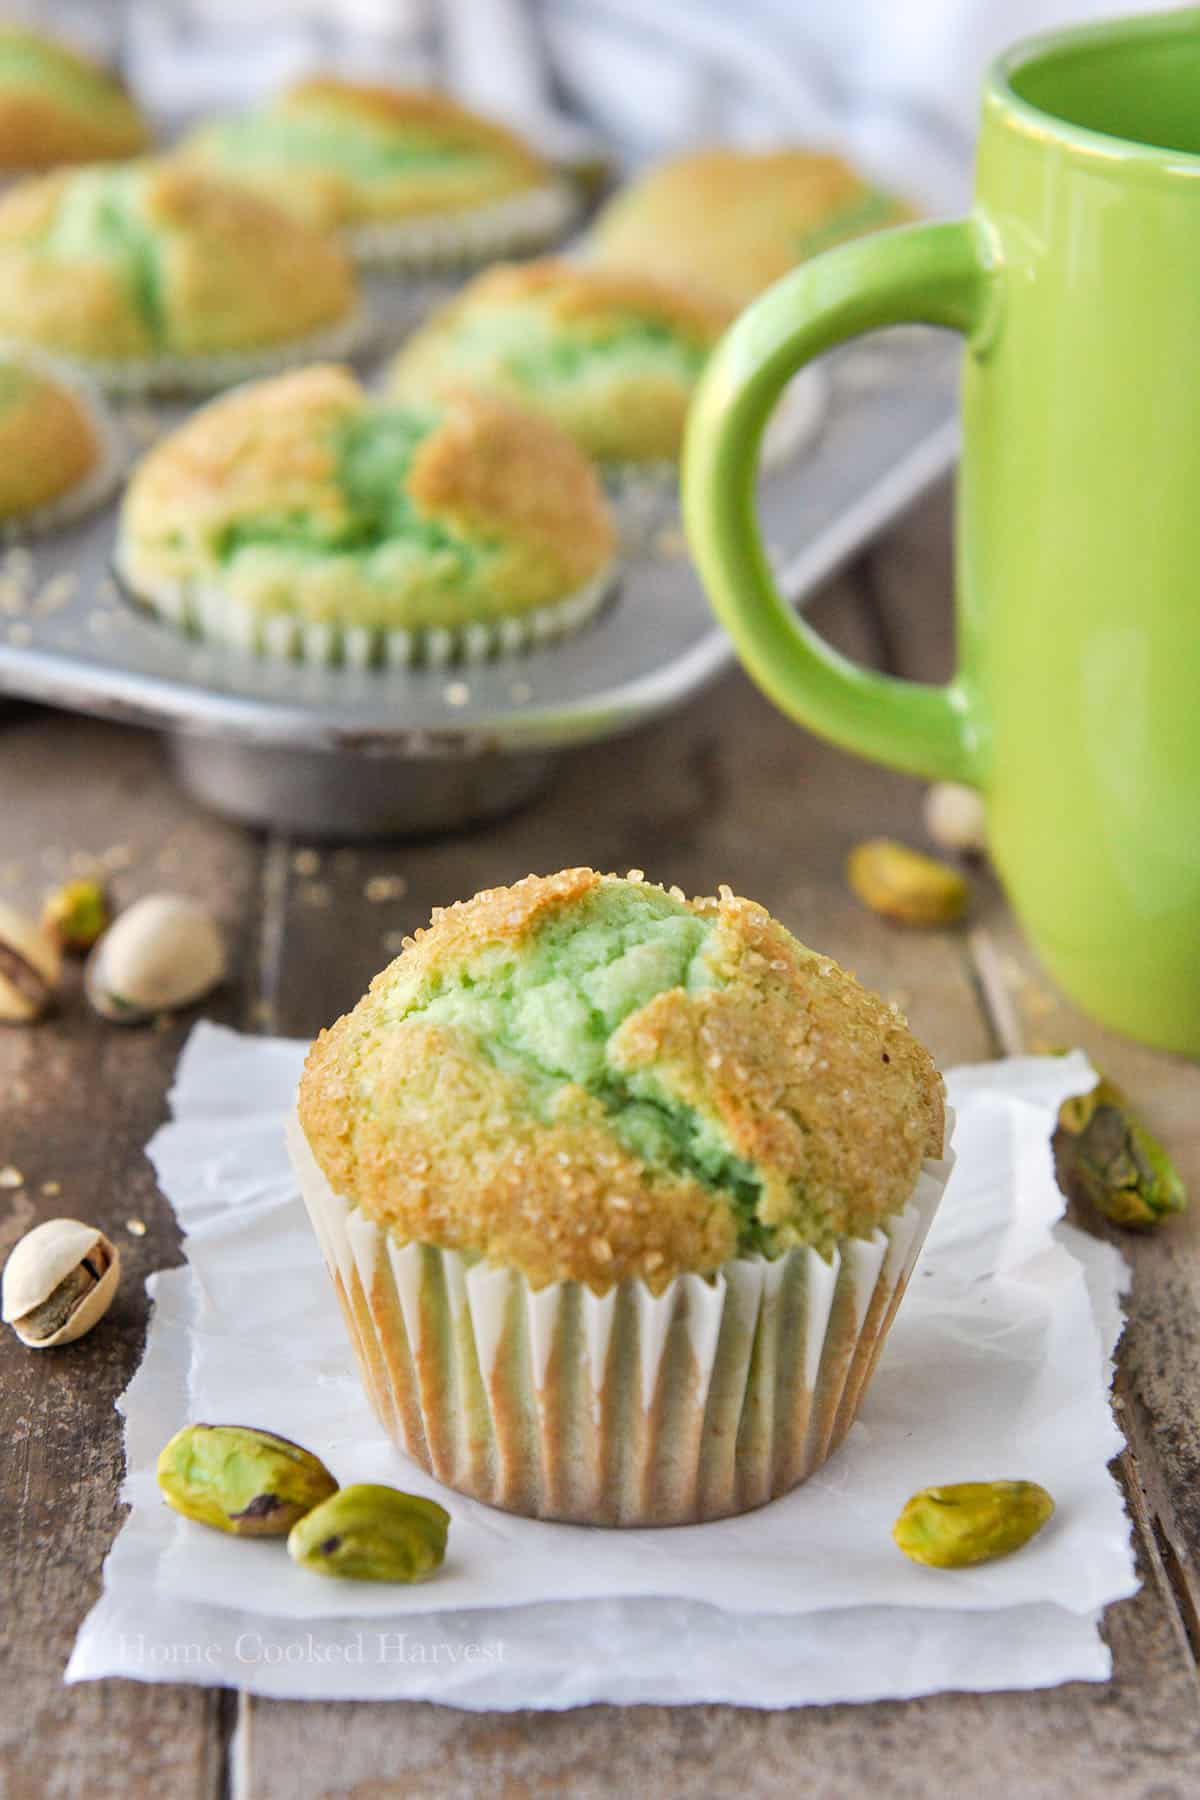 A pistachio muffin on parchment paper, with a green mug and a tray of muffins in the background.